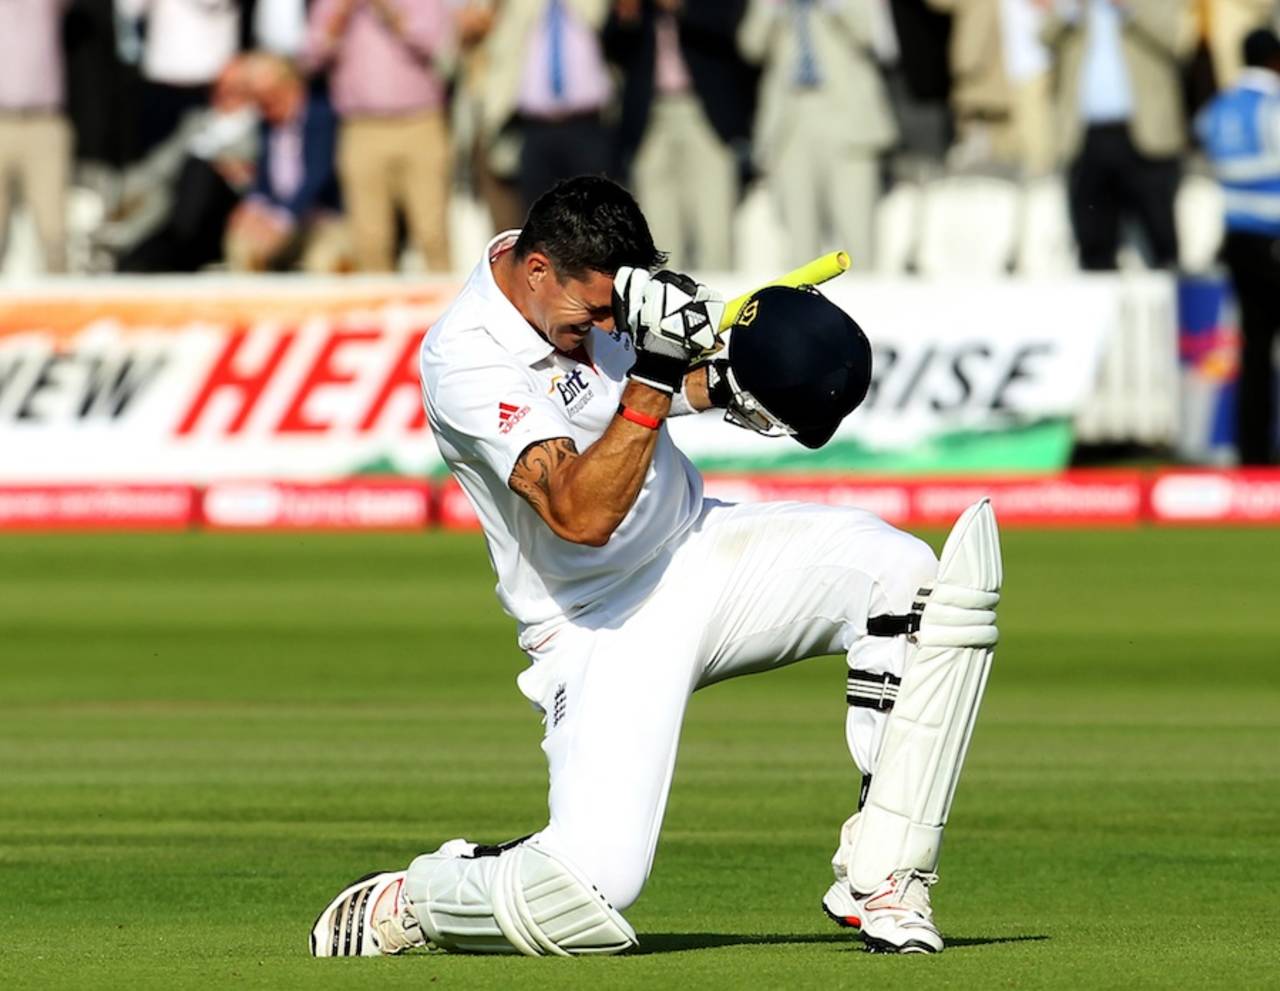 Kevin Pietersen is thrilled at passing 200, England v India, 1st Test, Lord's, 2nd day, July 22, 2011